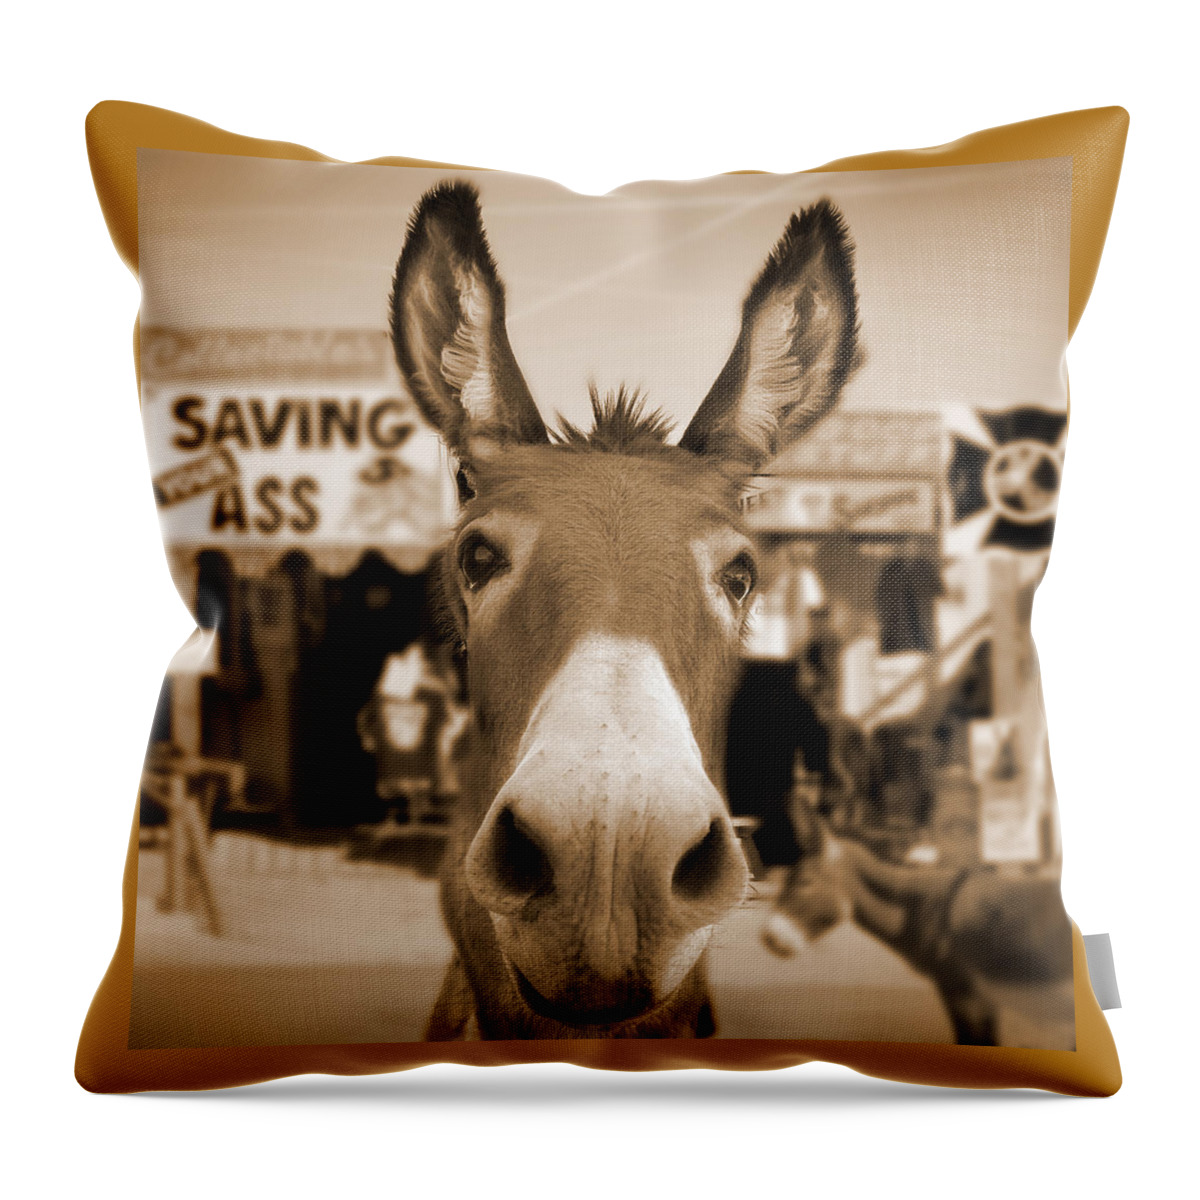 Route 66 Throw Pillow featuring the photograph Route 66 - Oatman Donkeys by Mike McGlothlen